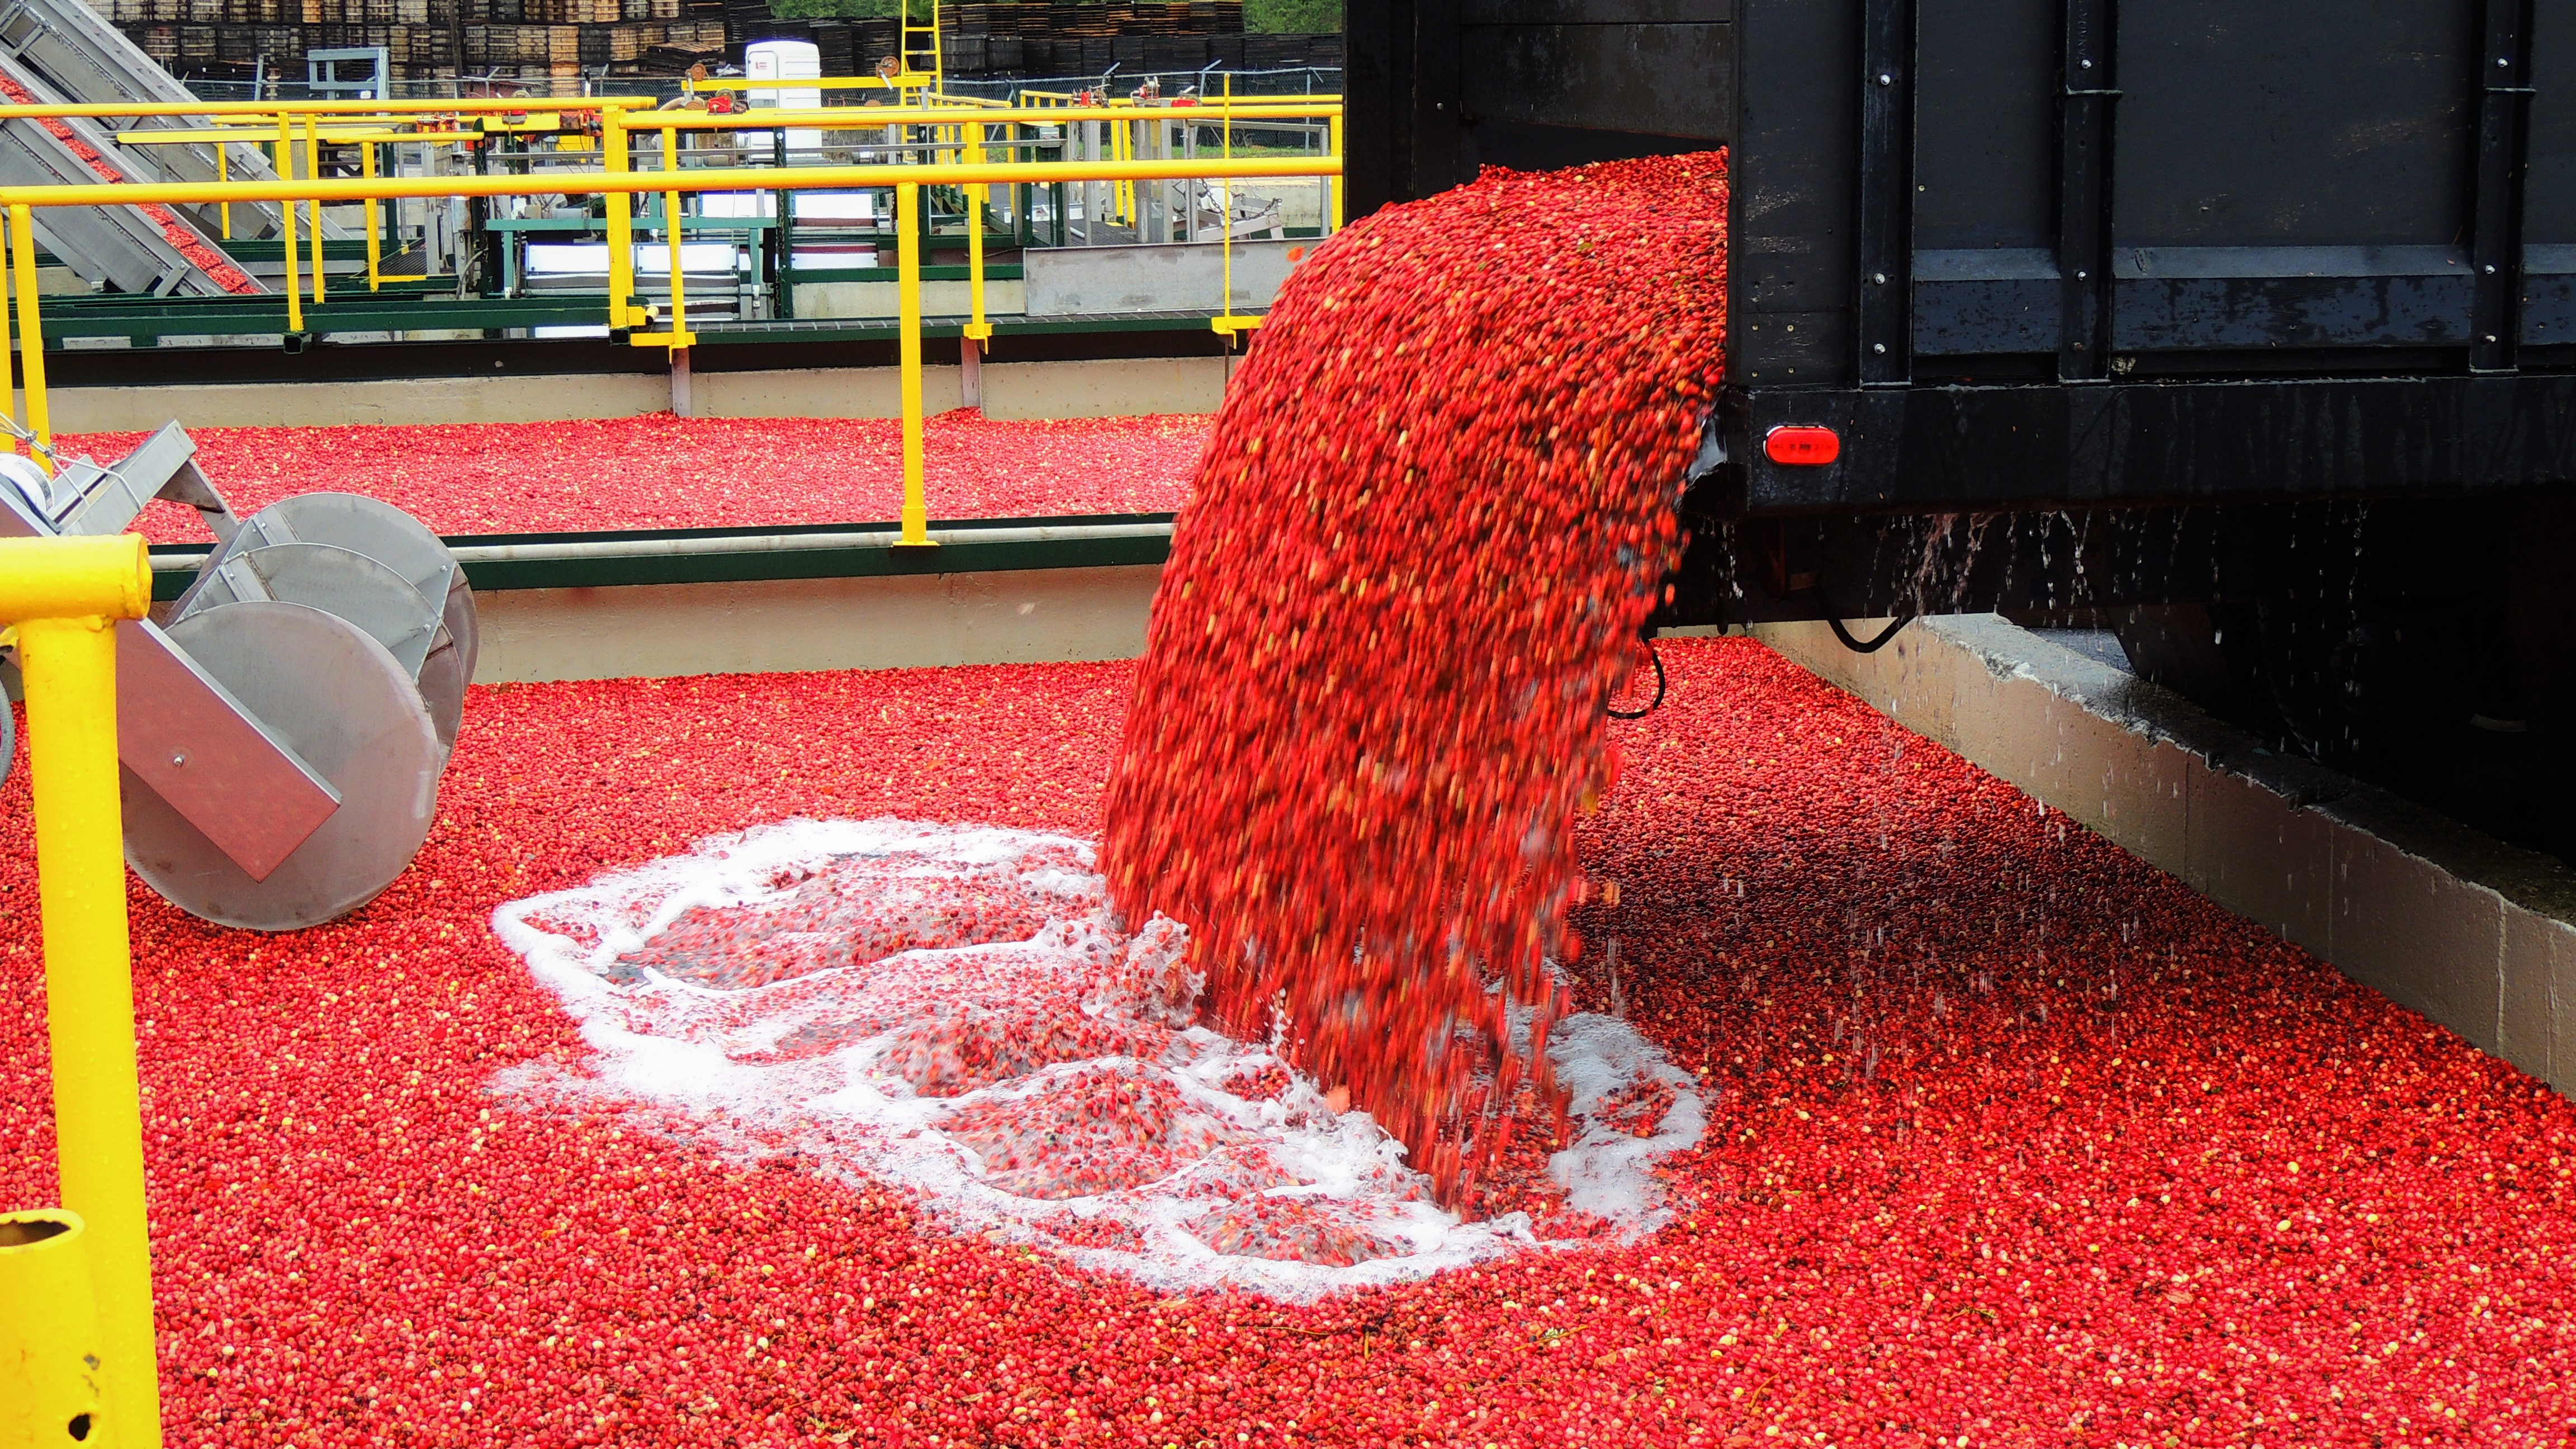 Projected Cranberry Harvest Looking Good